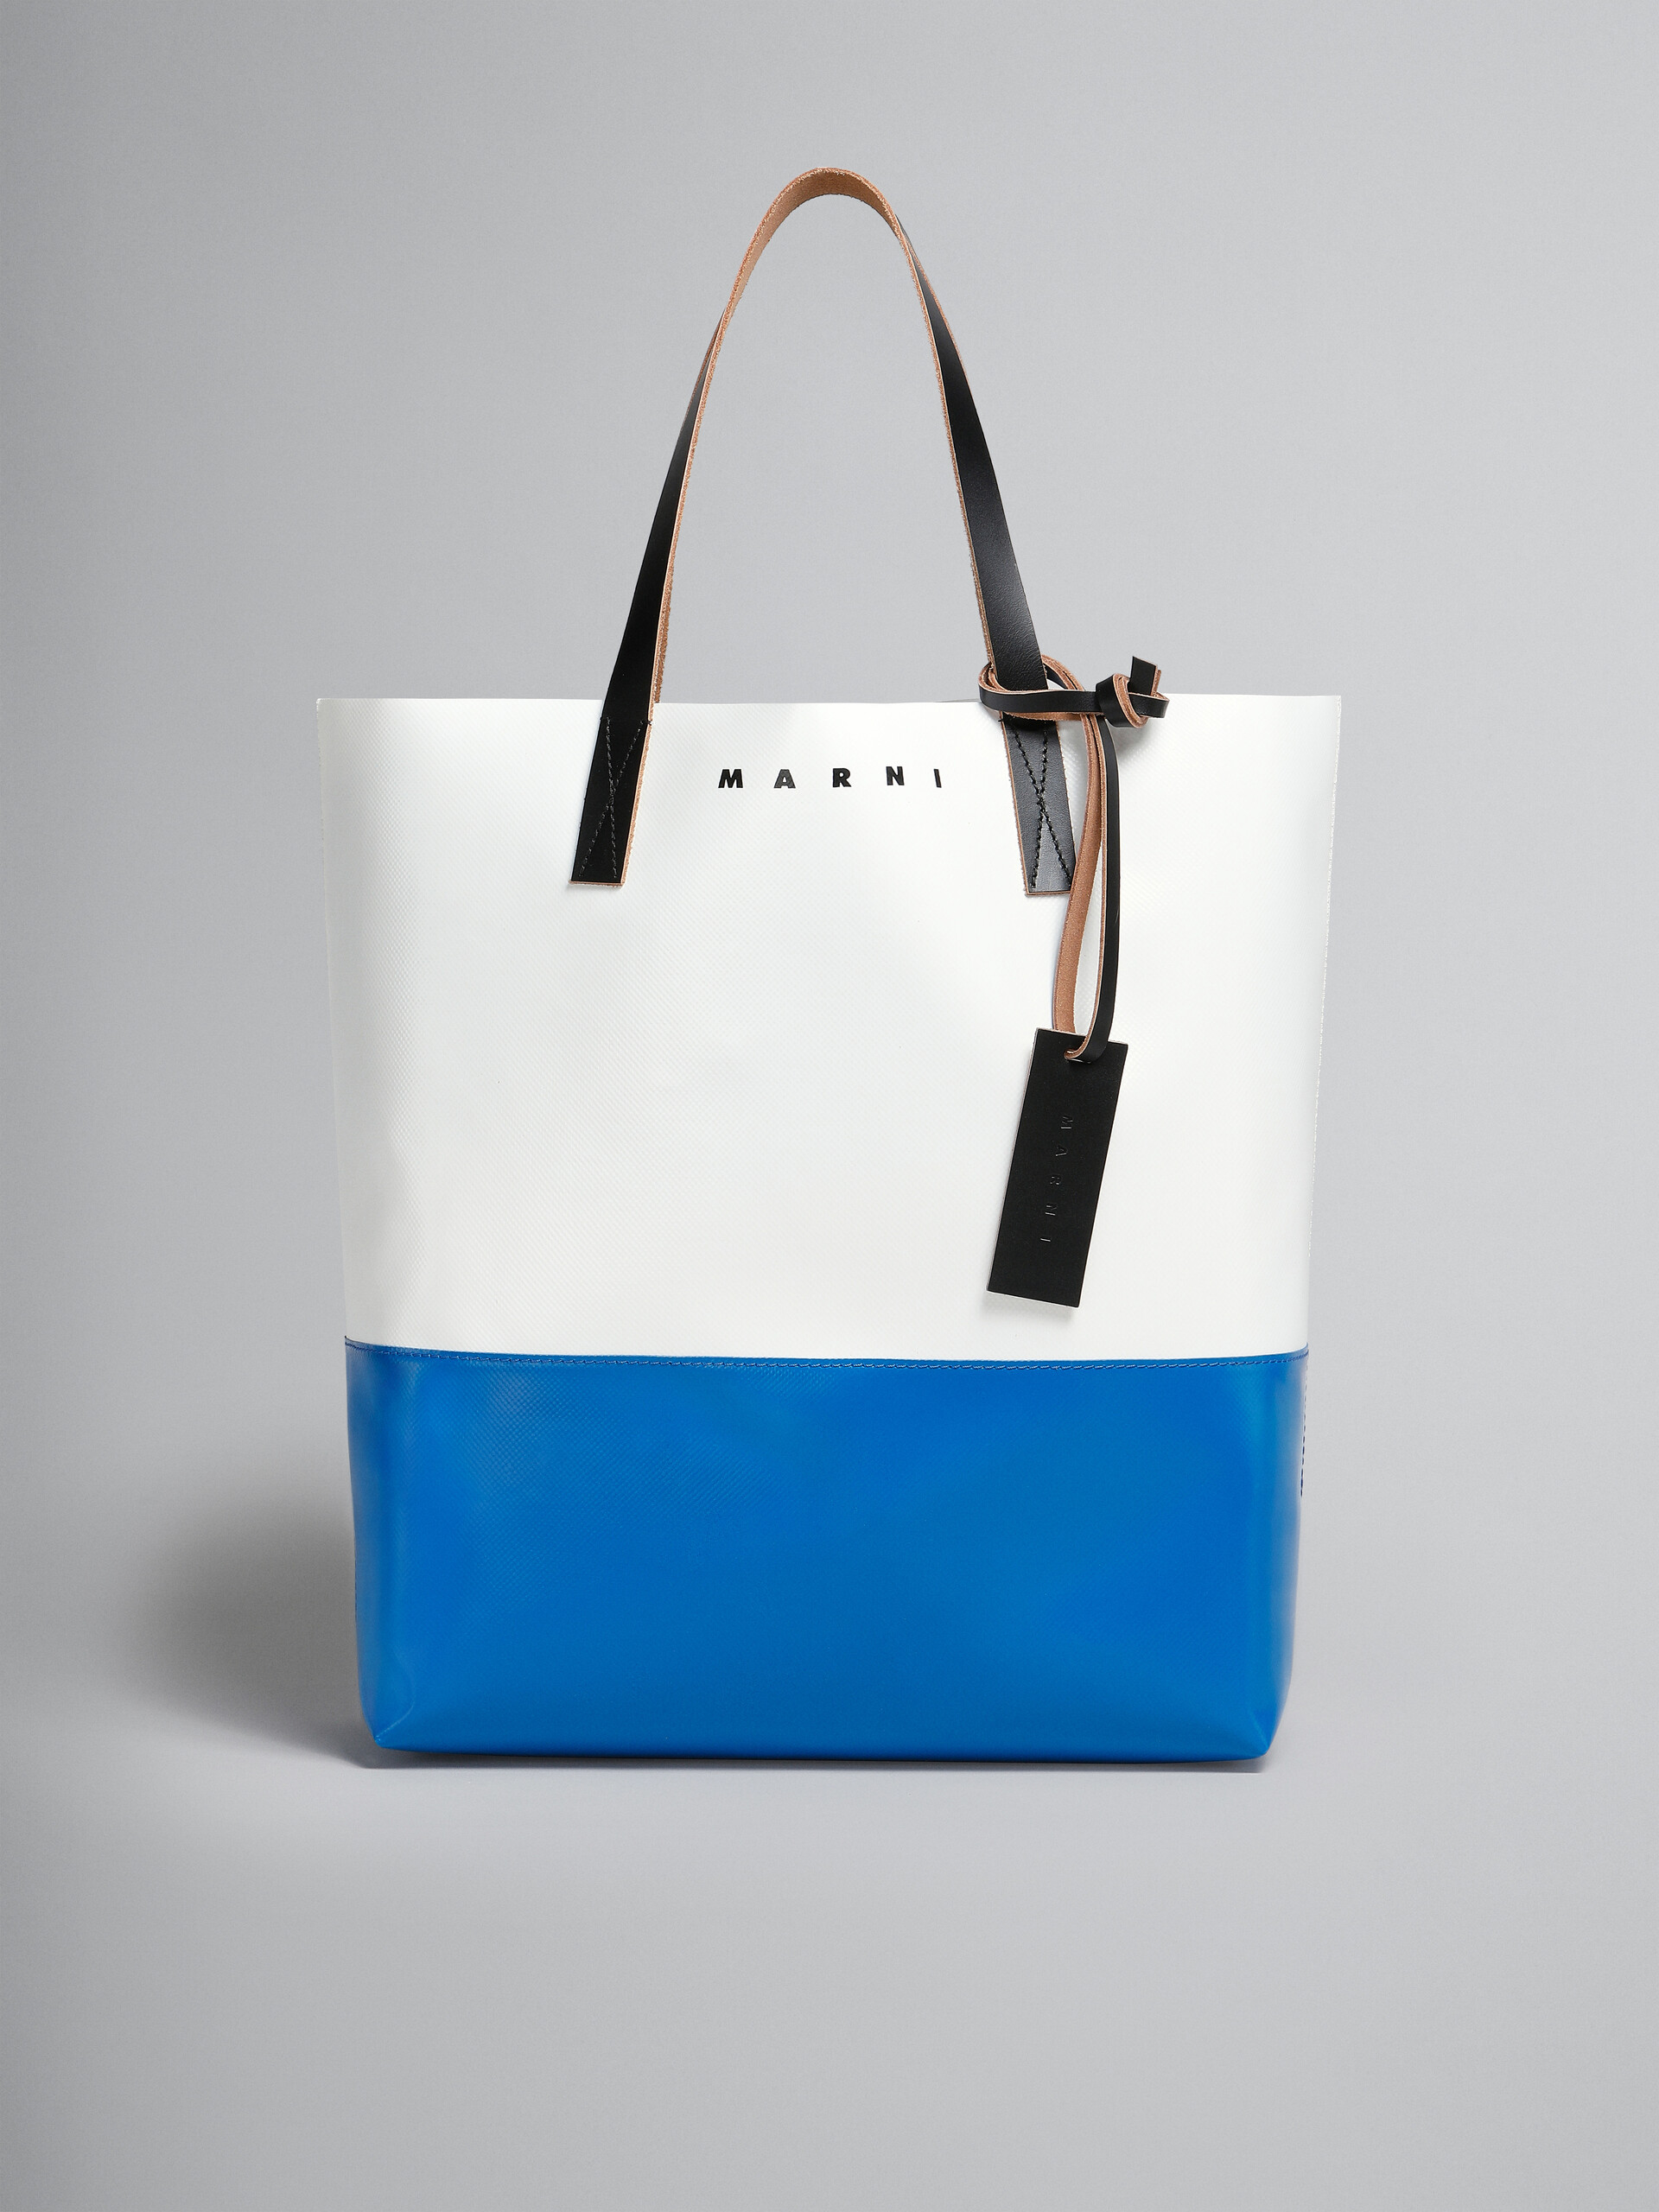 Tribeca shopping bag in white and blue - Shopping Bags - Image 1